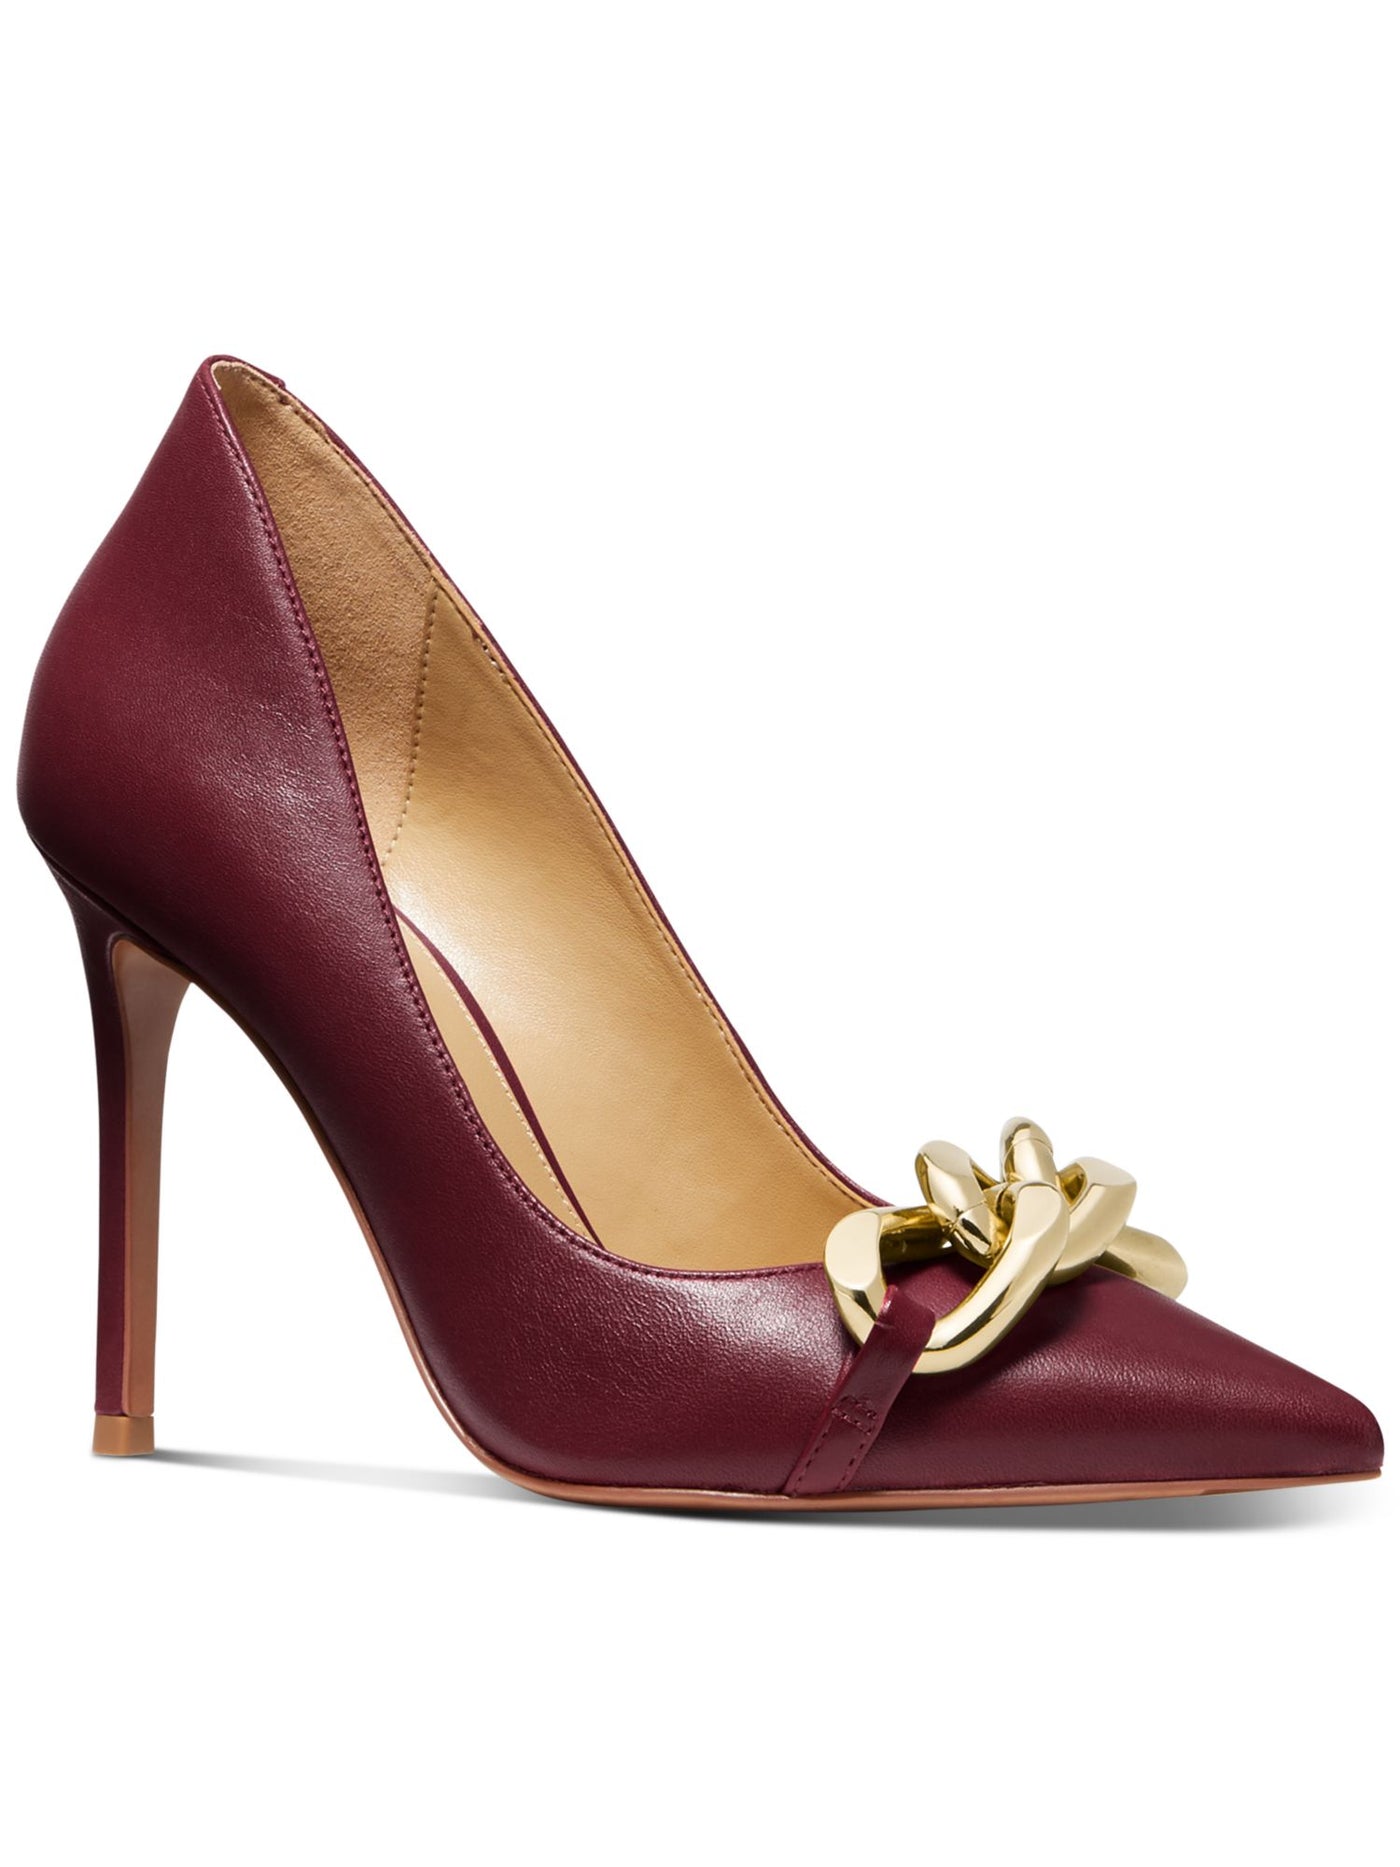 MICHAEL MICHAEL KORS Womens Burgundy Chain Accent Cushioned Scarlett Pointed Toe Stiletto Slip On Leather Dress Pumps Shoes 8 M